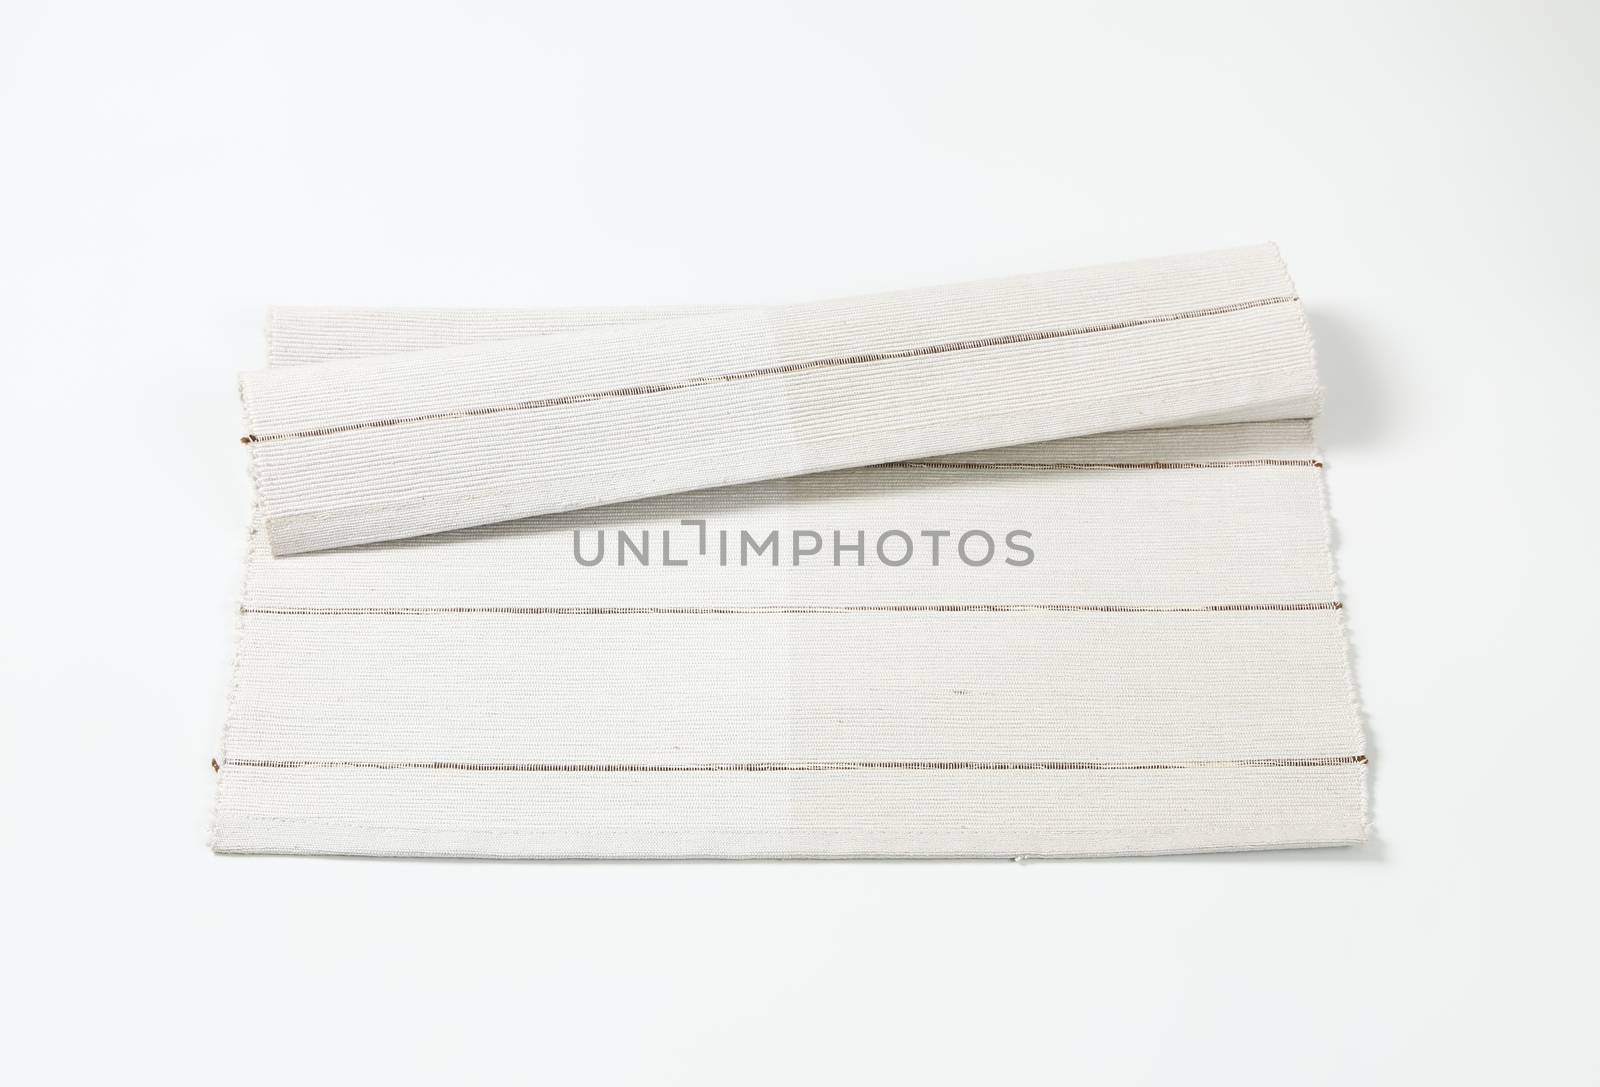 Off white cotton placemat by Digifoodstock